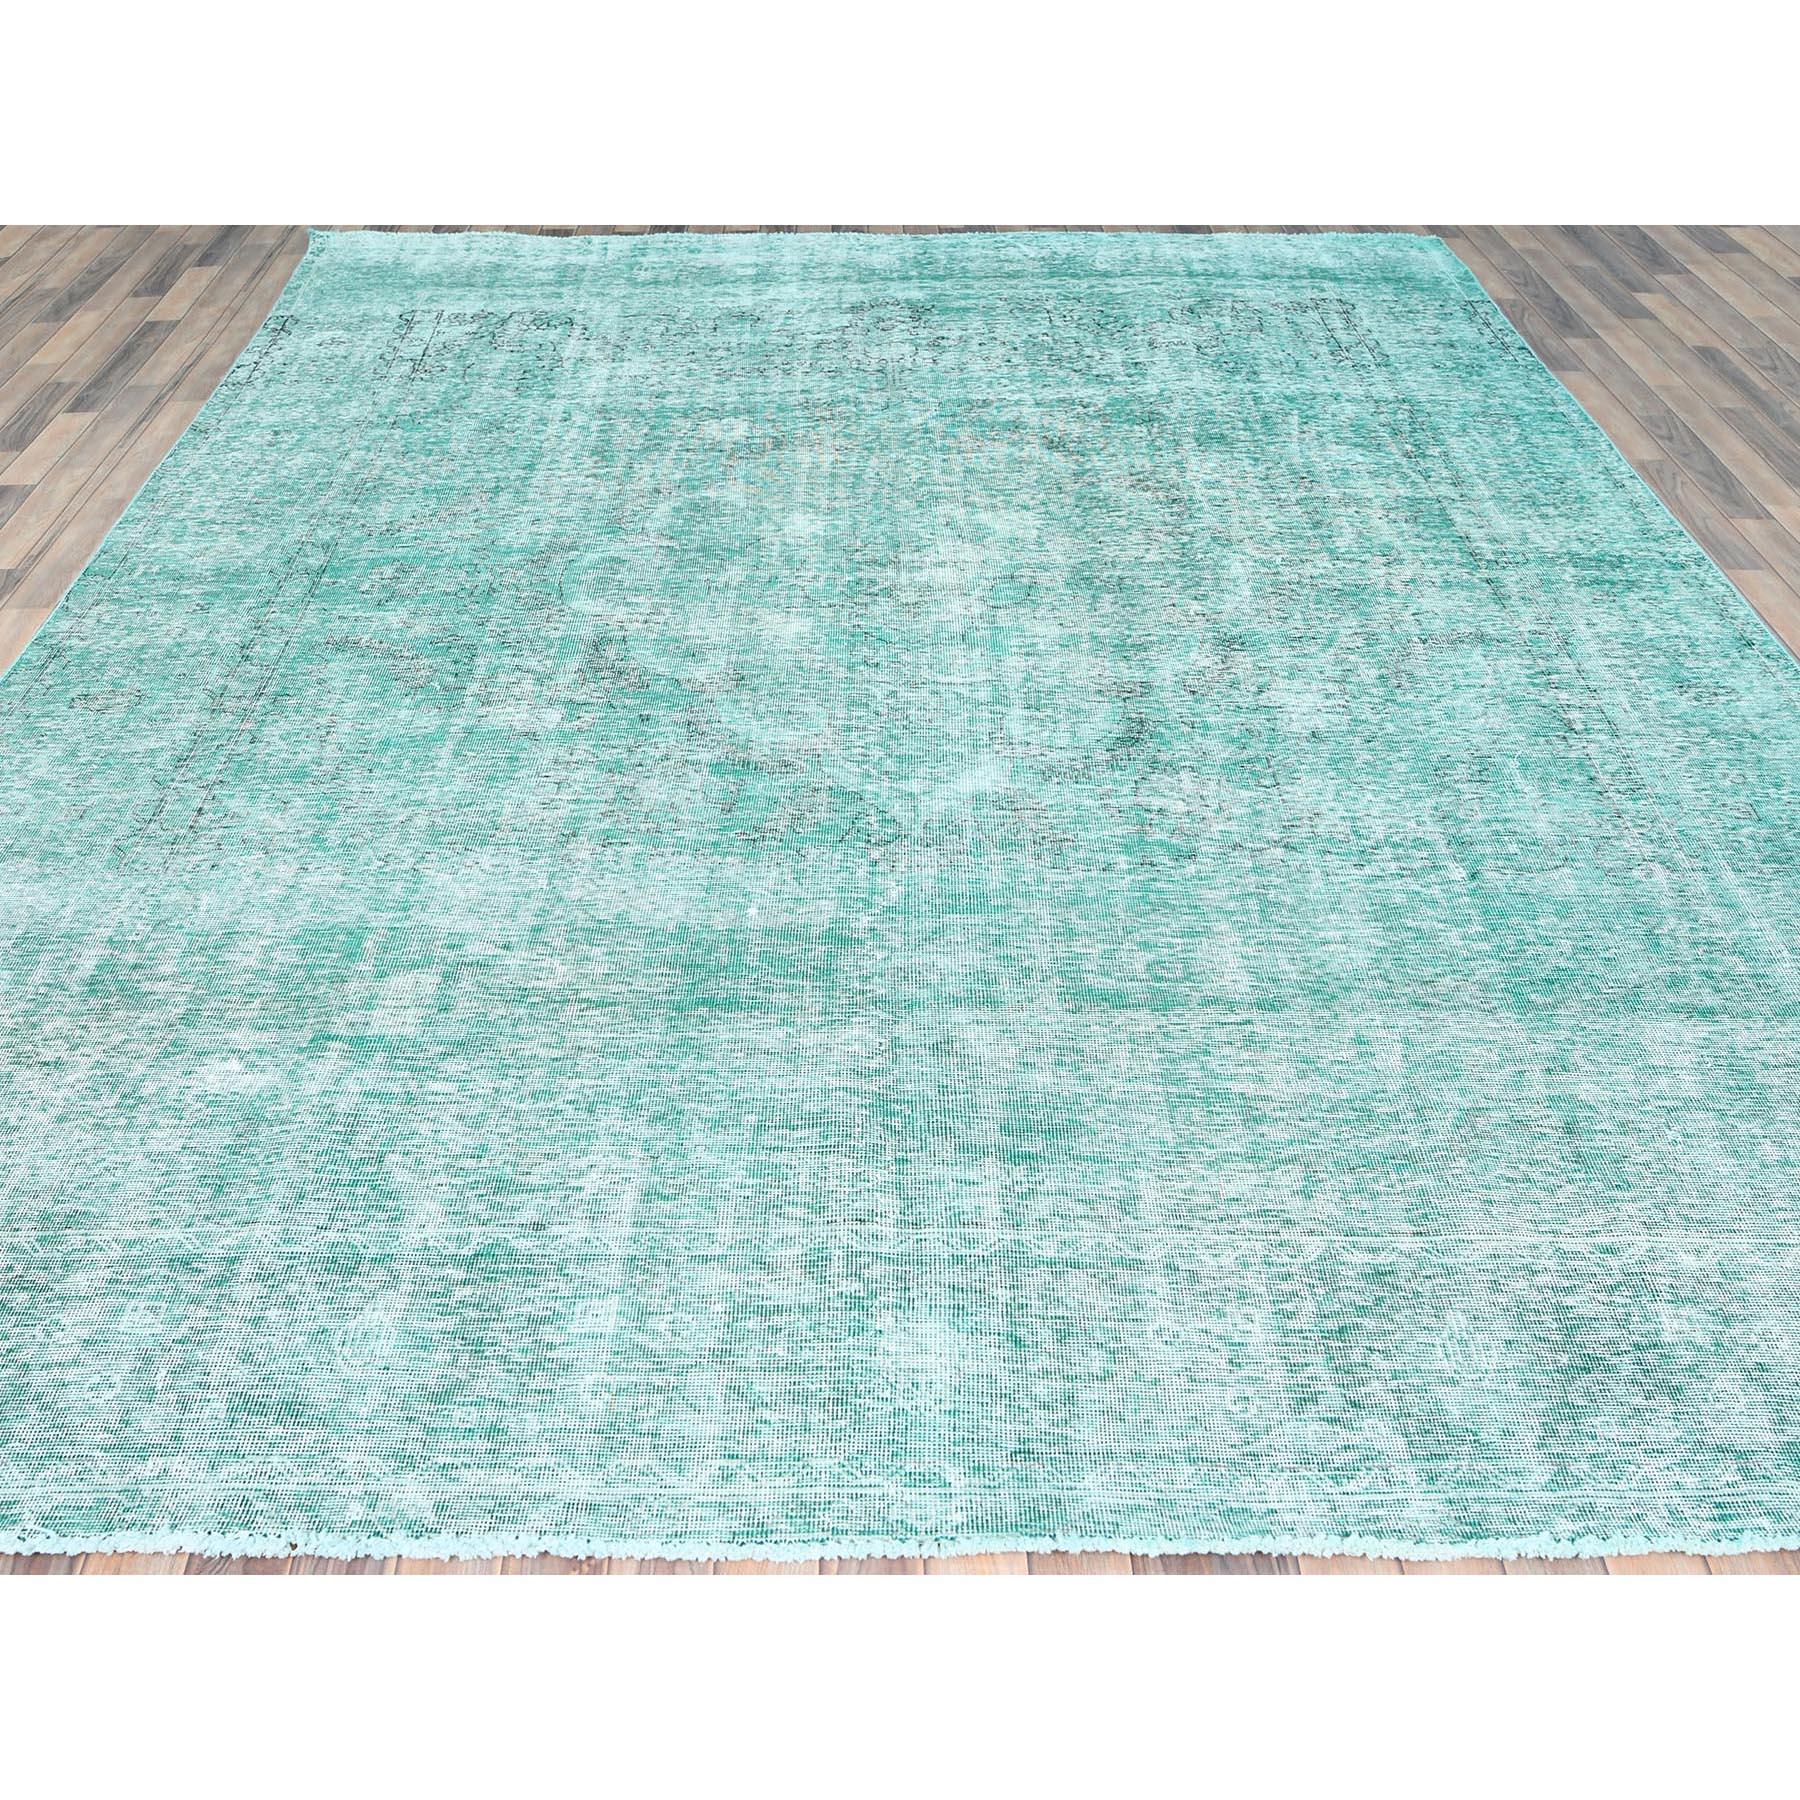 Medieval Emerald Green Wool Hand Knotted Old Persian Tabriz Worn Down Distressed Look Rug For Sale